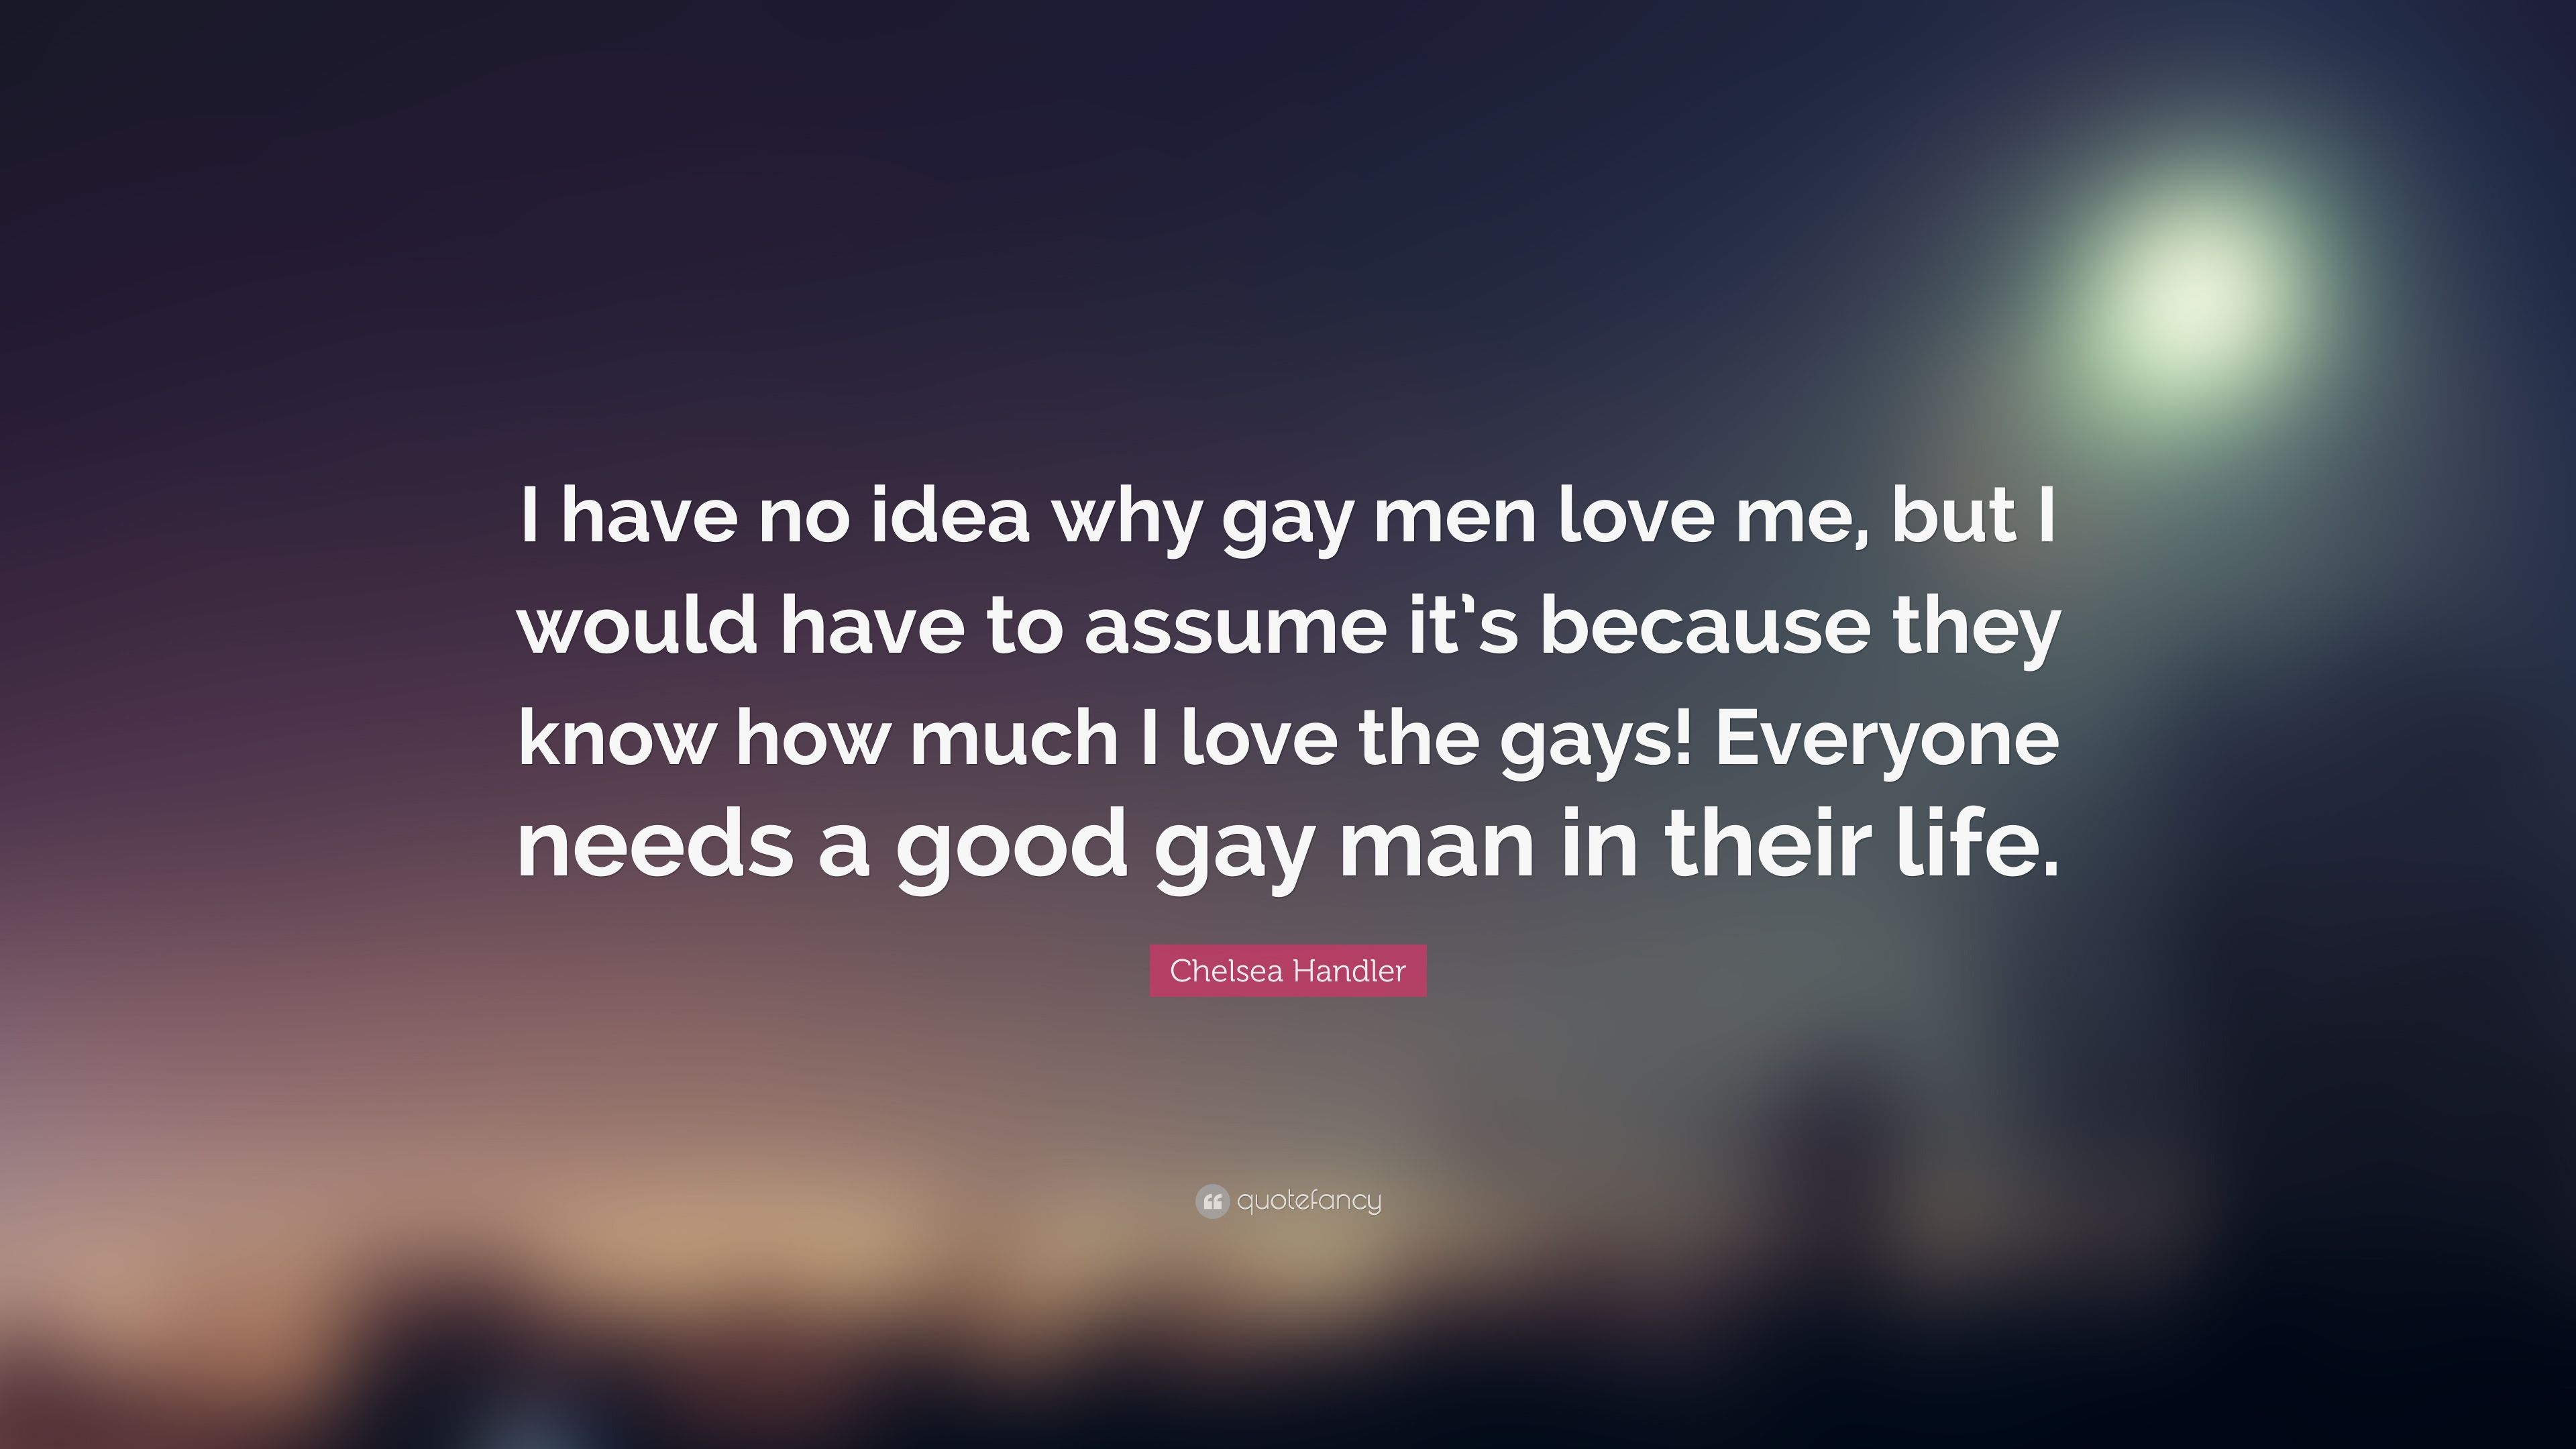 Best Of Gay Love Quotes Image. Love quotes collection within HD image